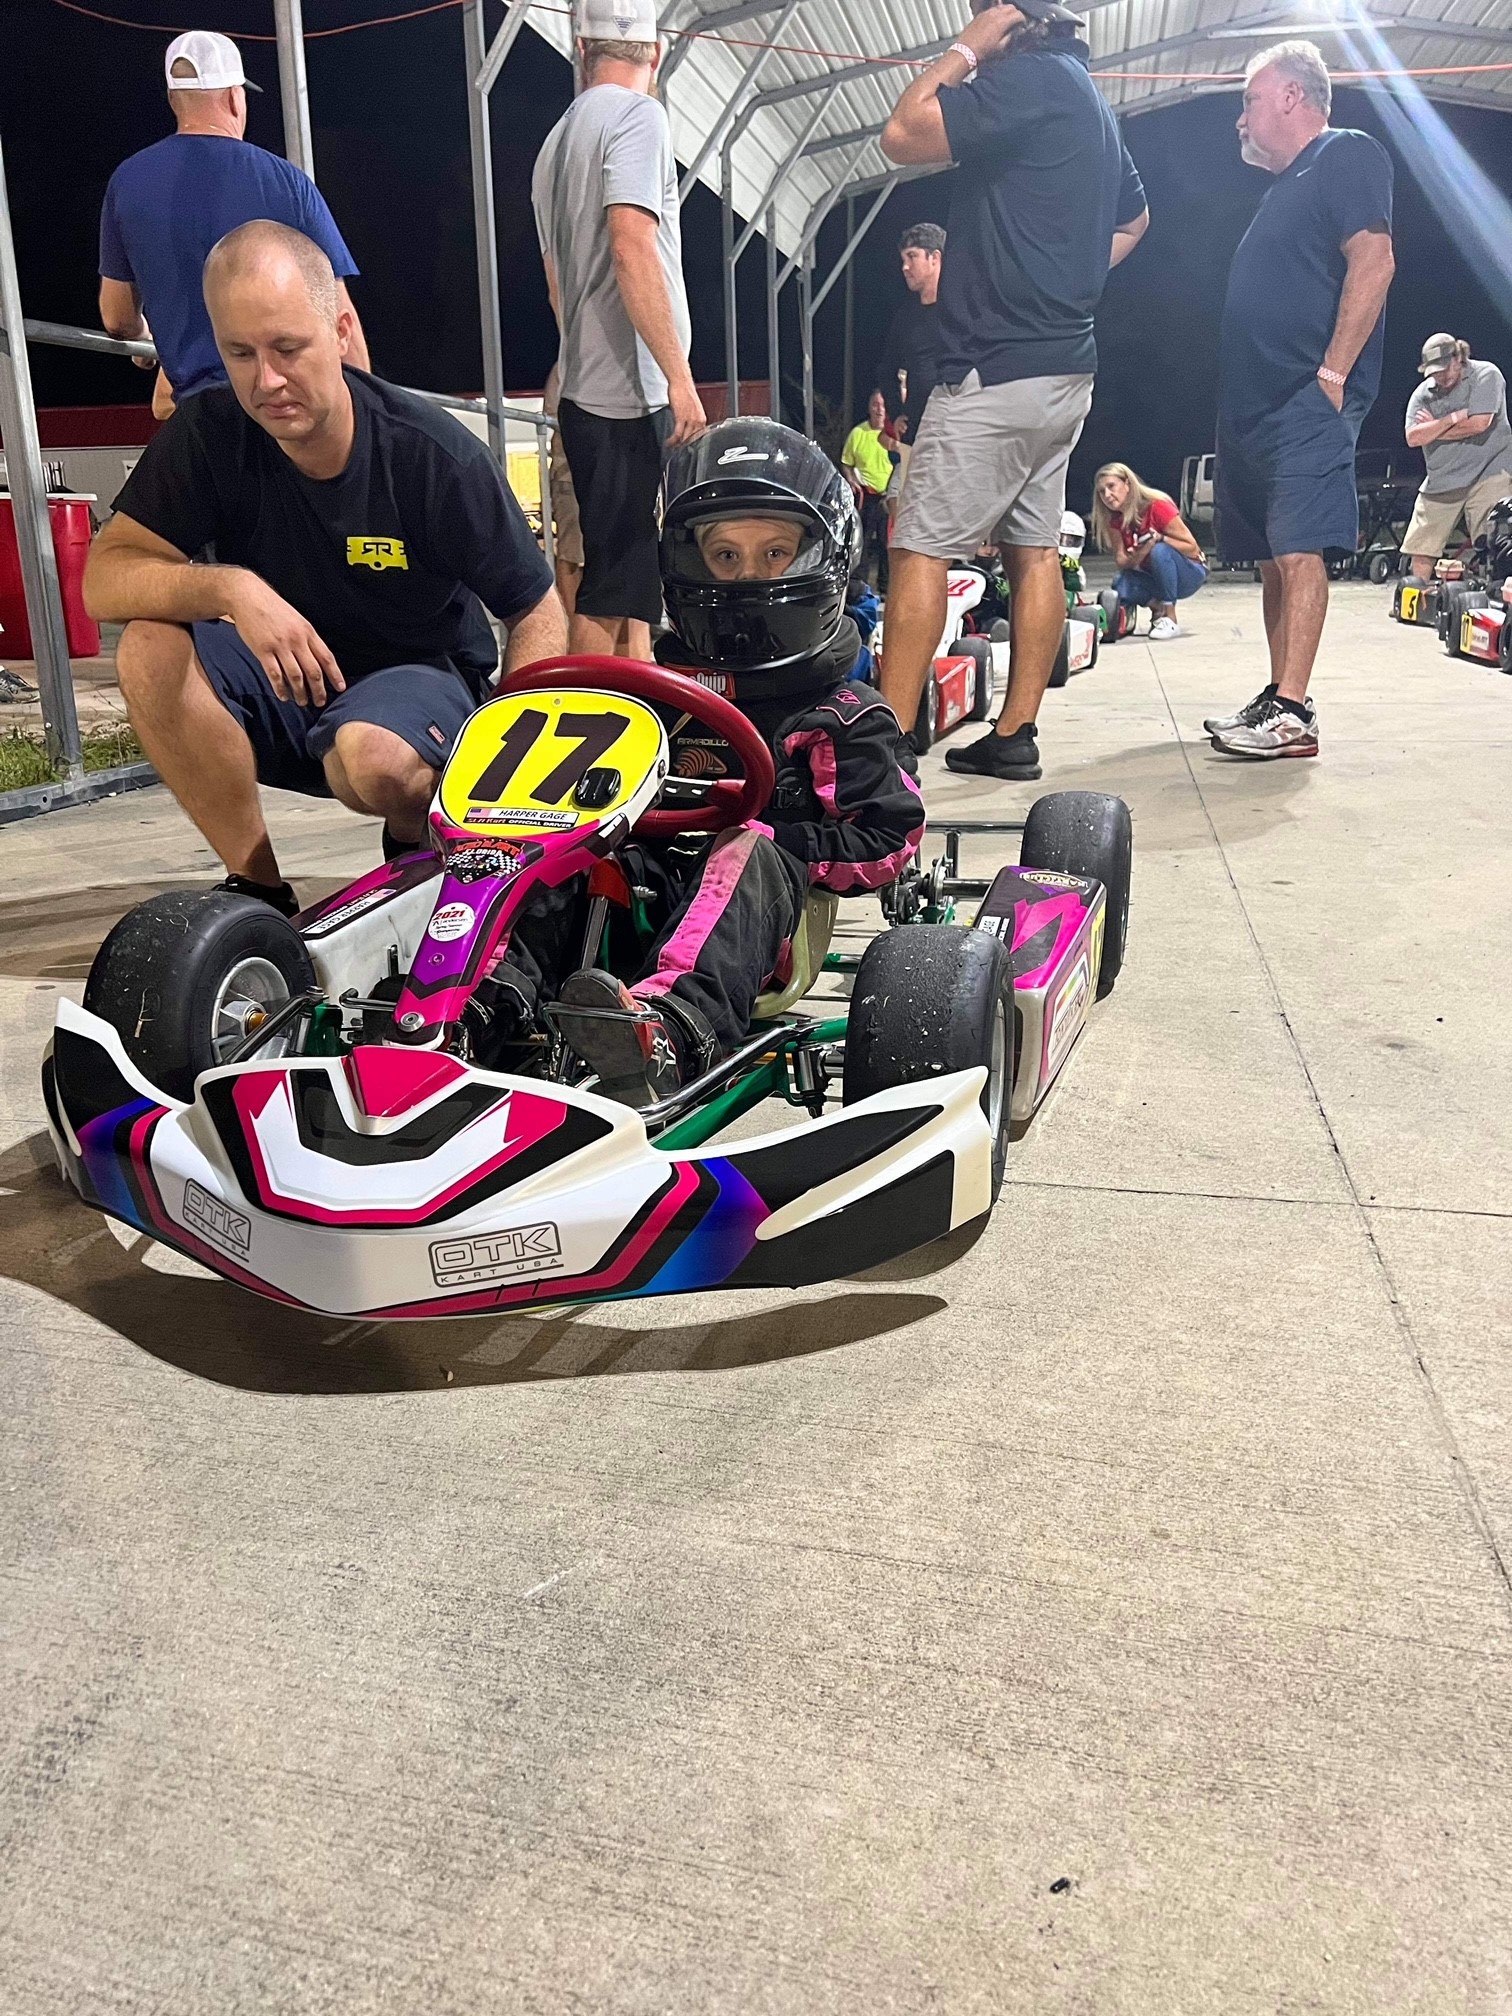 Harper, who hears with Baha 5 Sound Processors, before a go-kart race